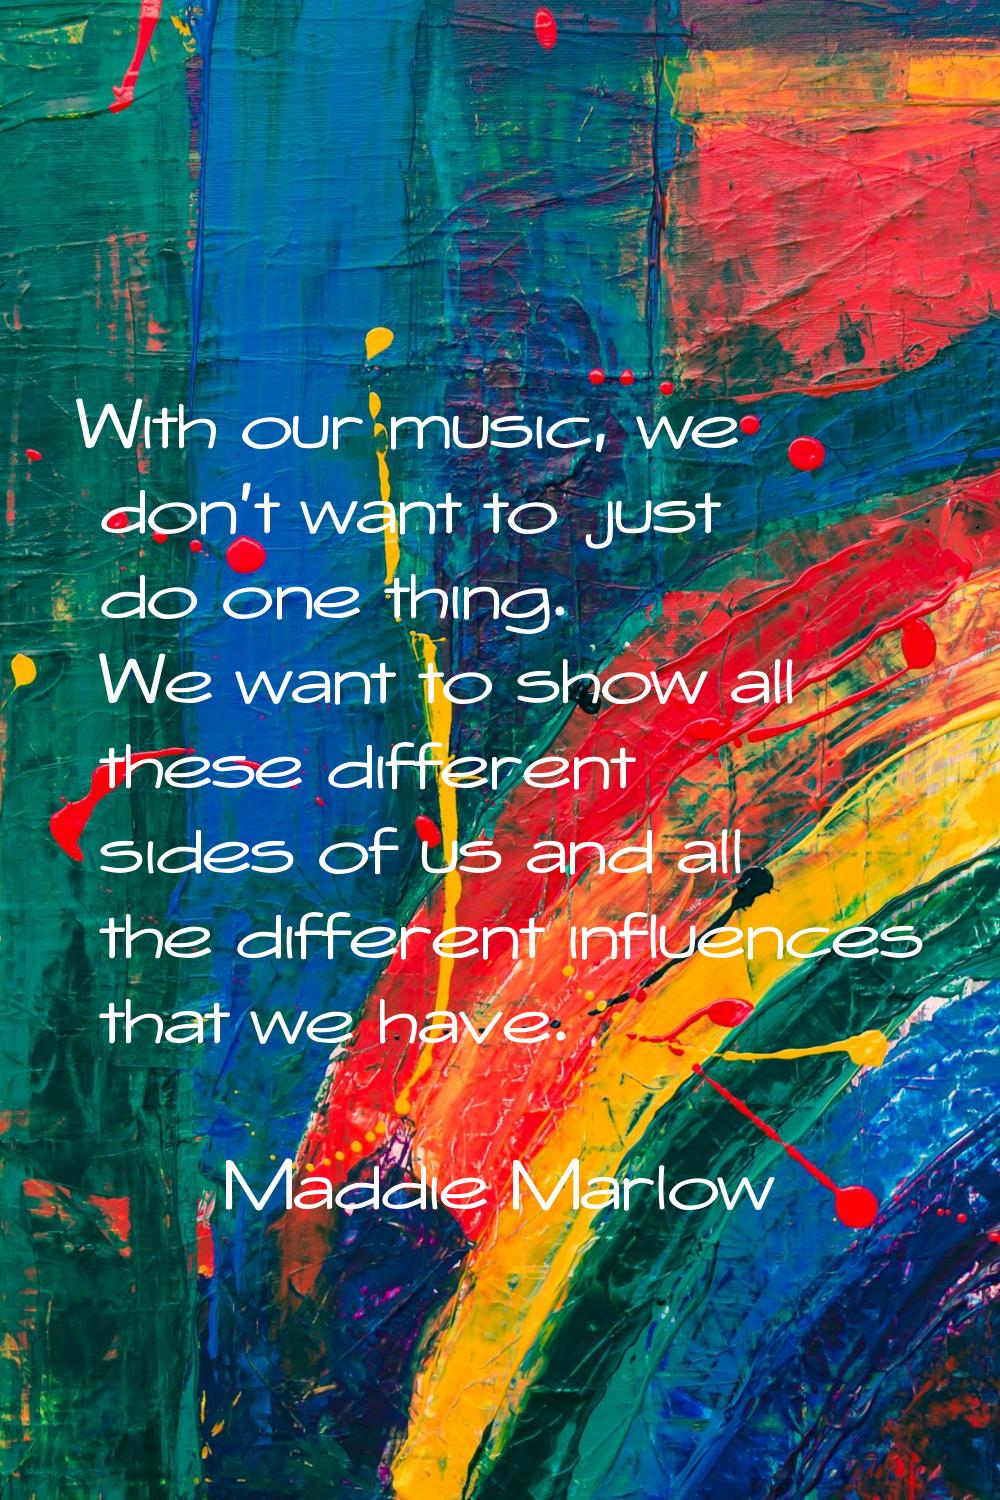 With our music, we don't want to just do one thing. We want to show all these different sides of us